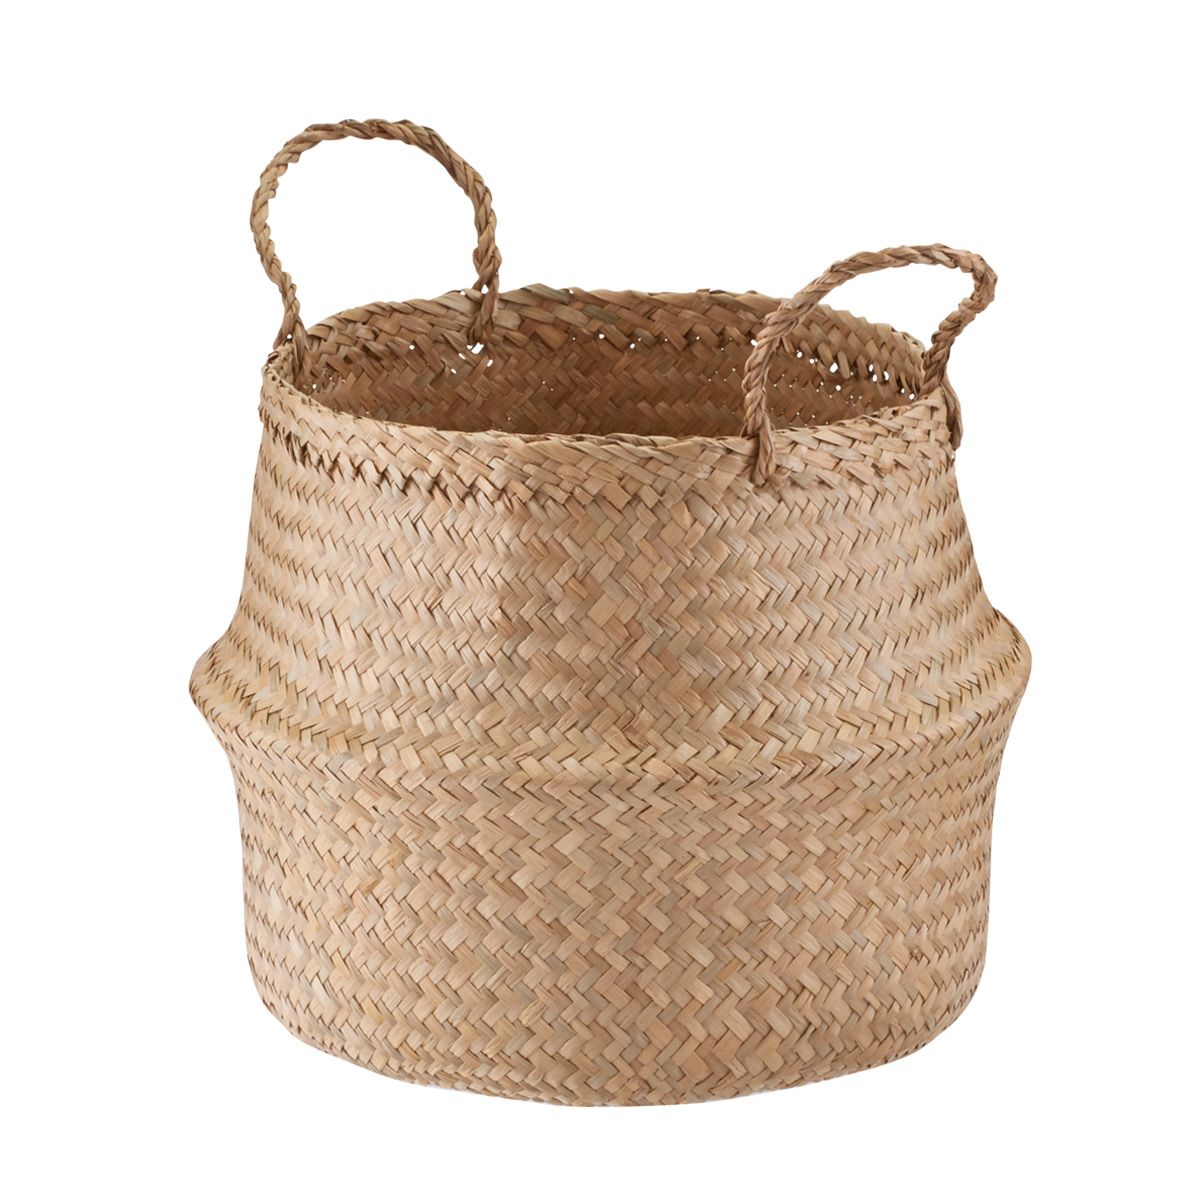 Seagrass Belly Basket | The Container Store